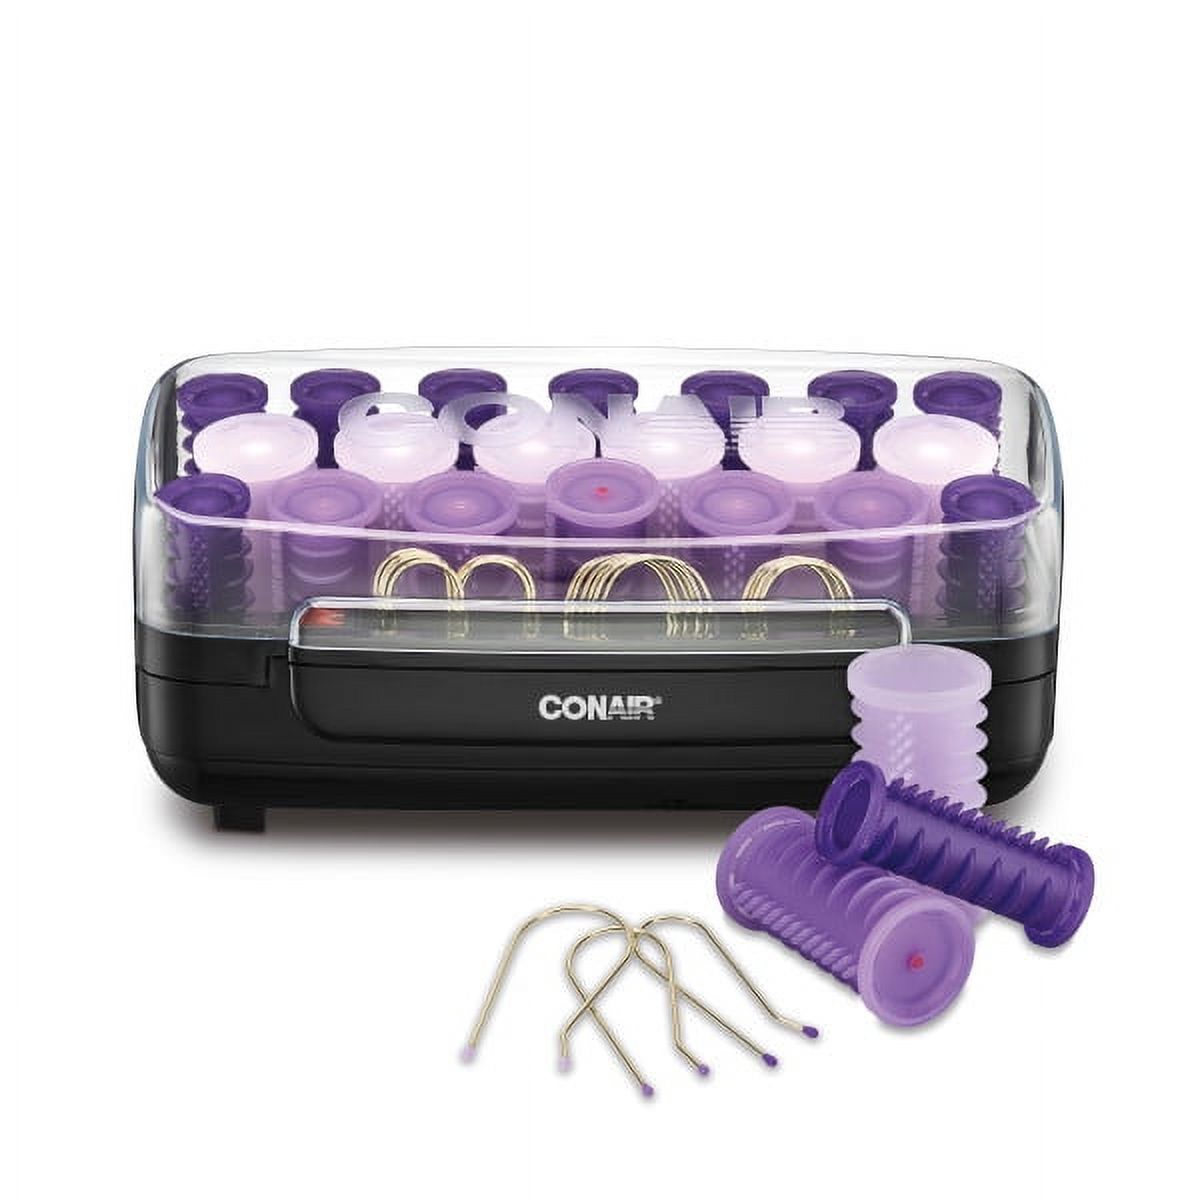 Conair EasyStart Hot Rollers, Create Curls and Waves That Last with 20 Assorted Hot Rollers and 20 Metal Pins, HS11RX - image 1 of 7